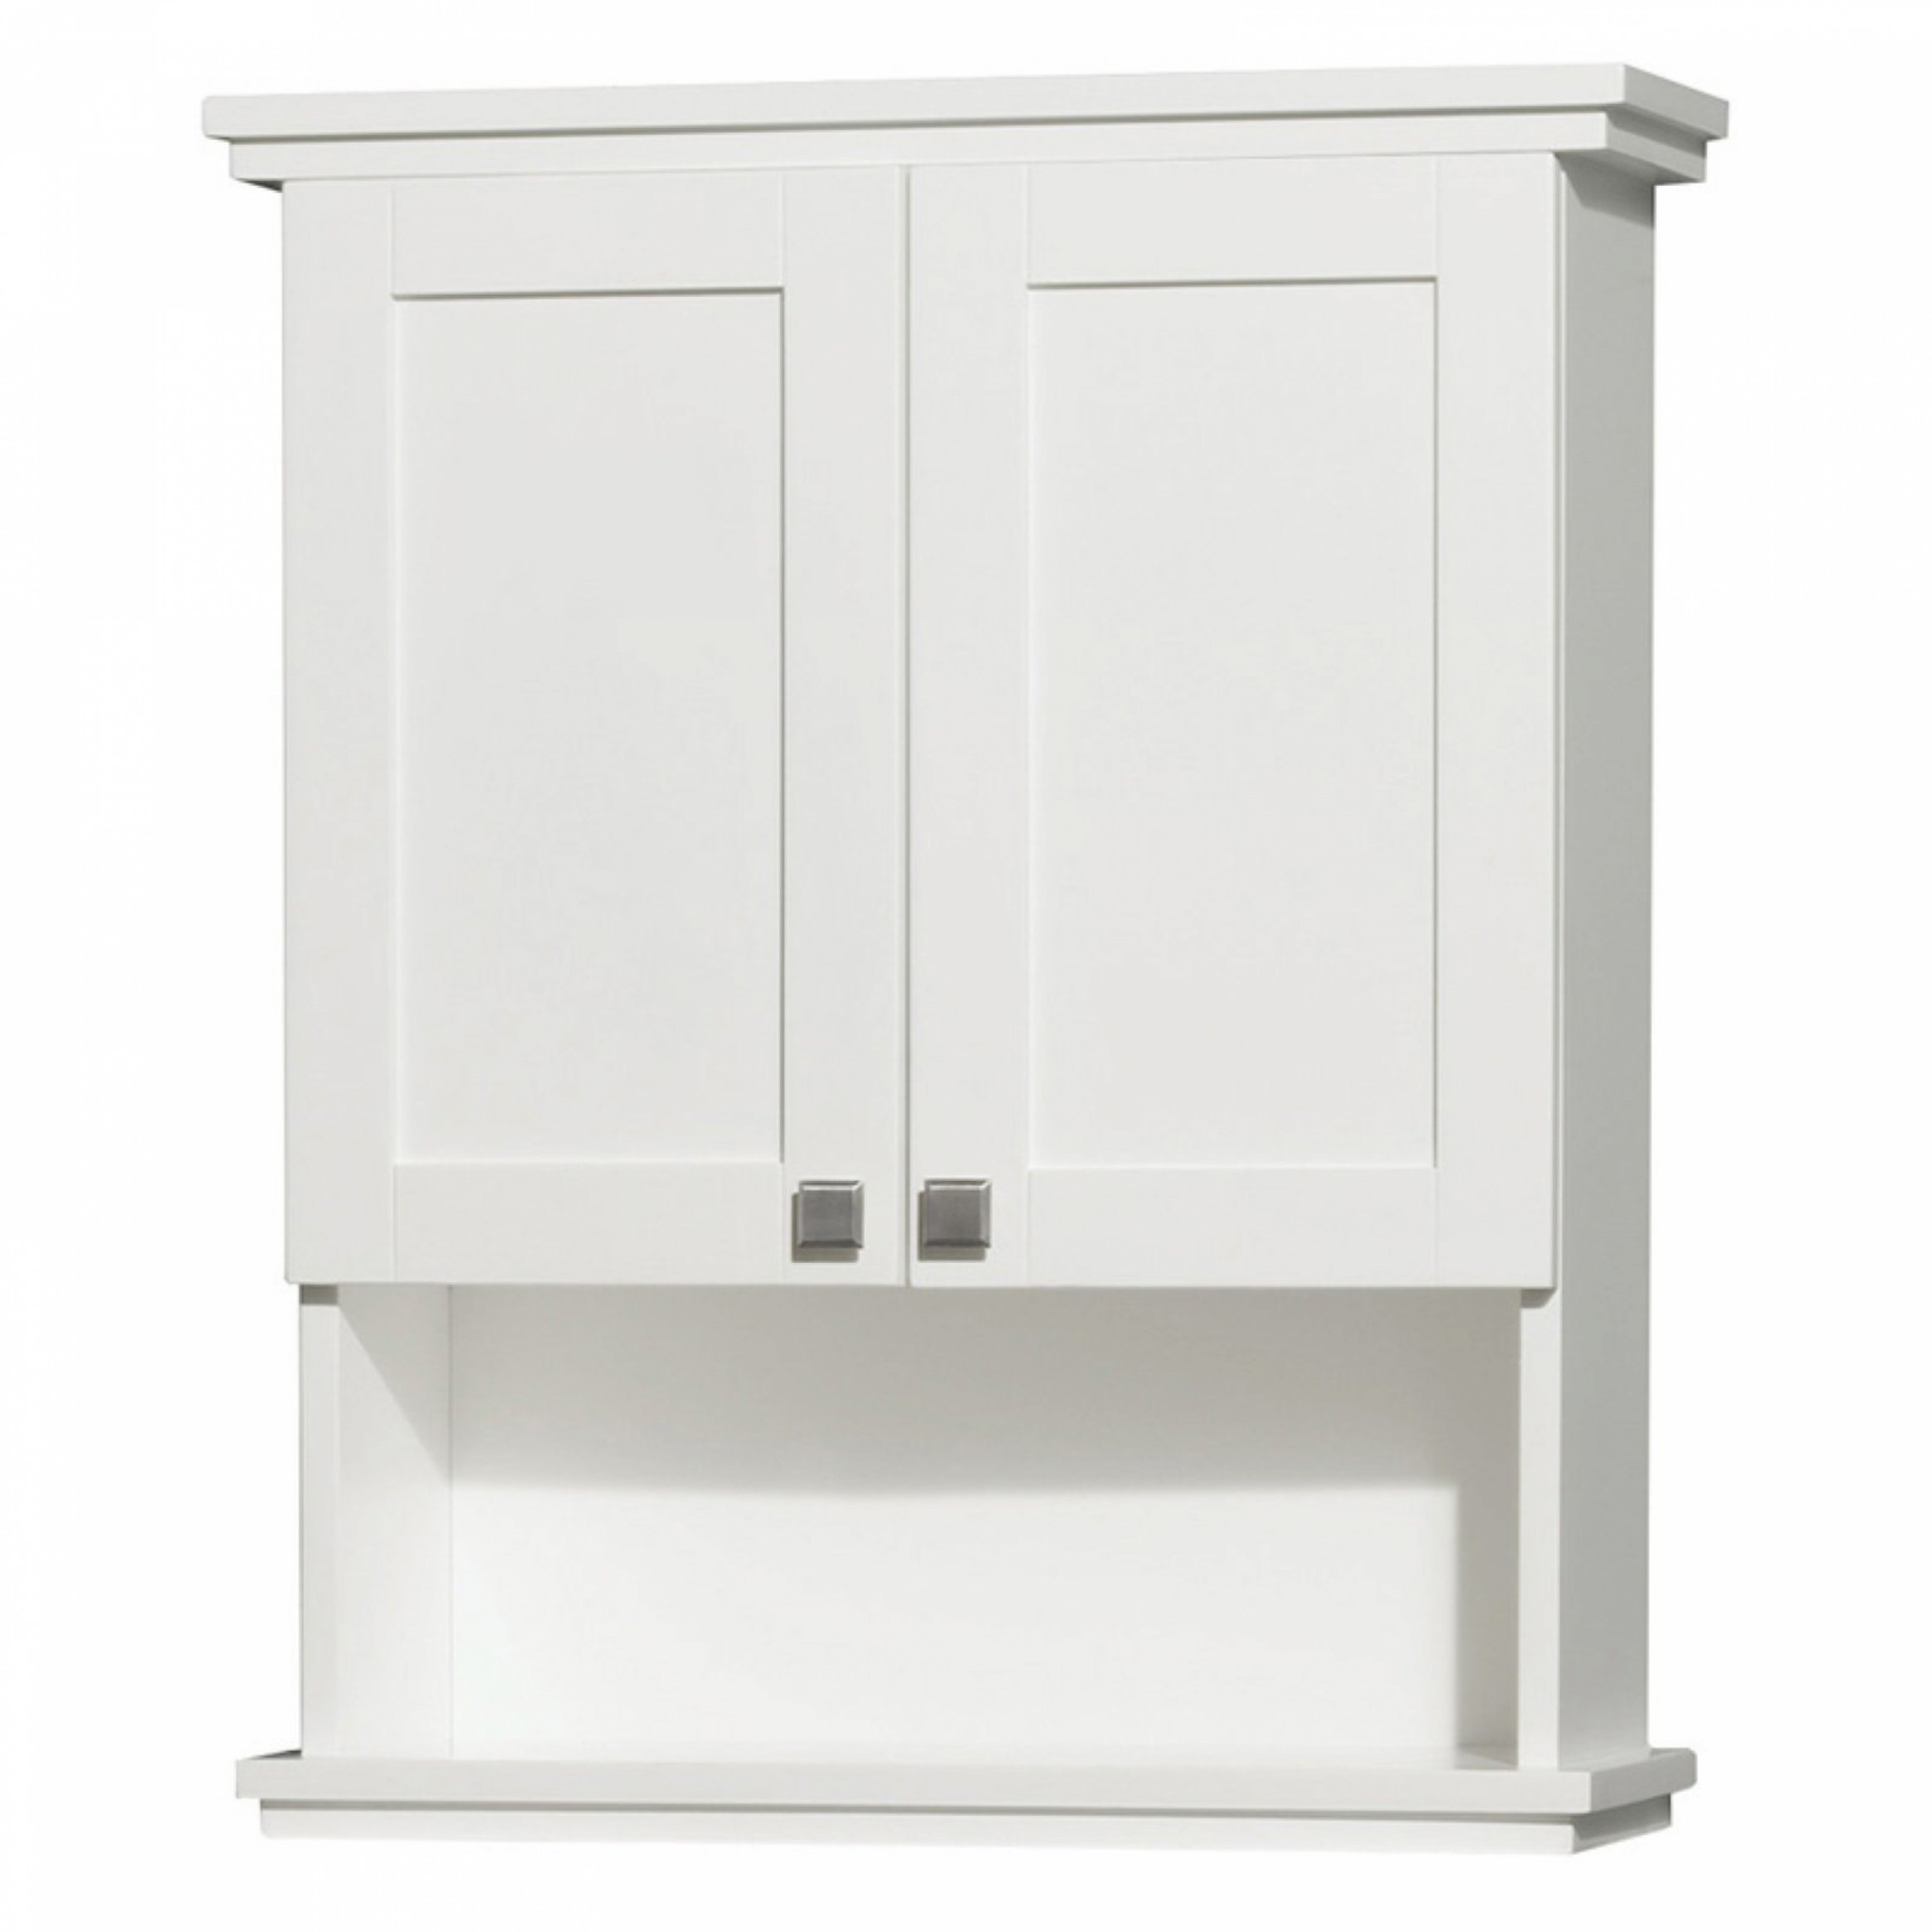 Wyndham Collection WCV8000WCWH Acclaim Wall Mount Bathroom Cabinet with Brushed Chrome Hardware, White